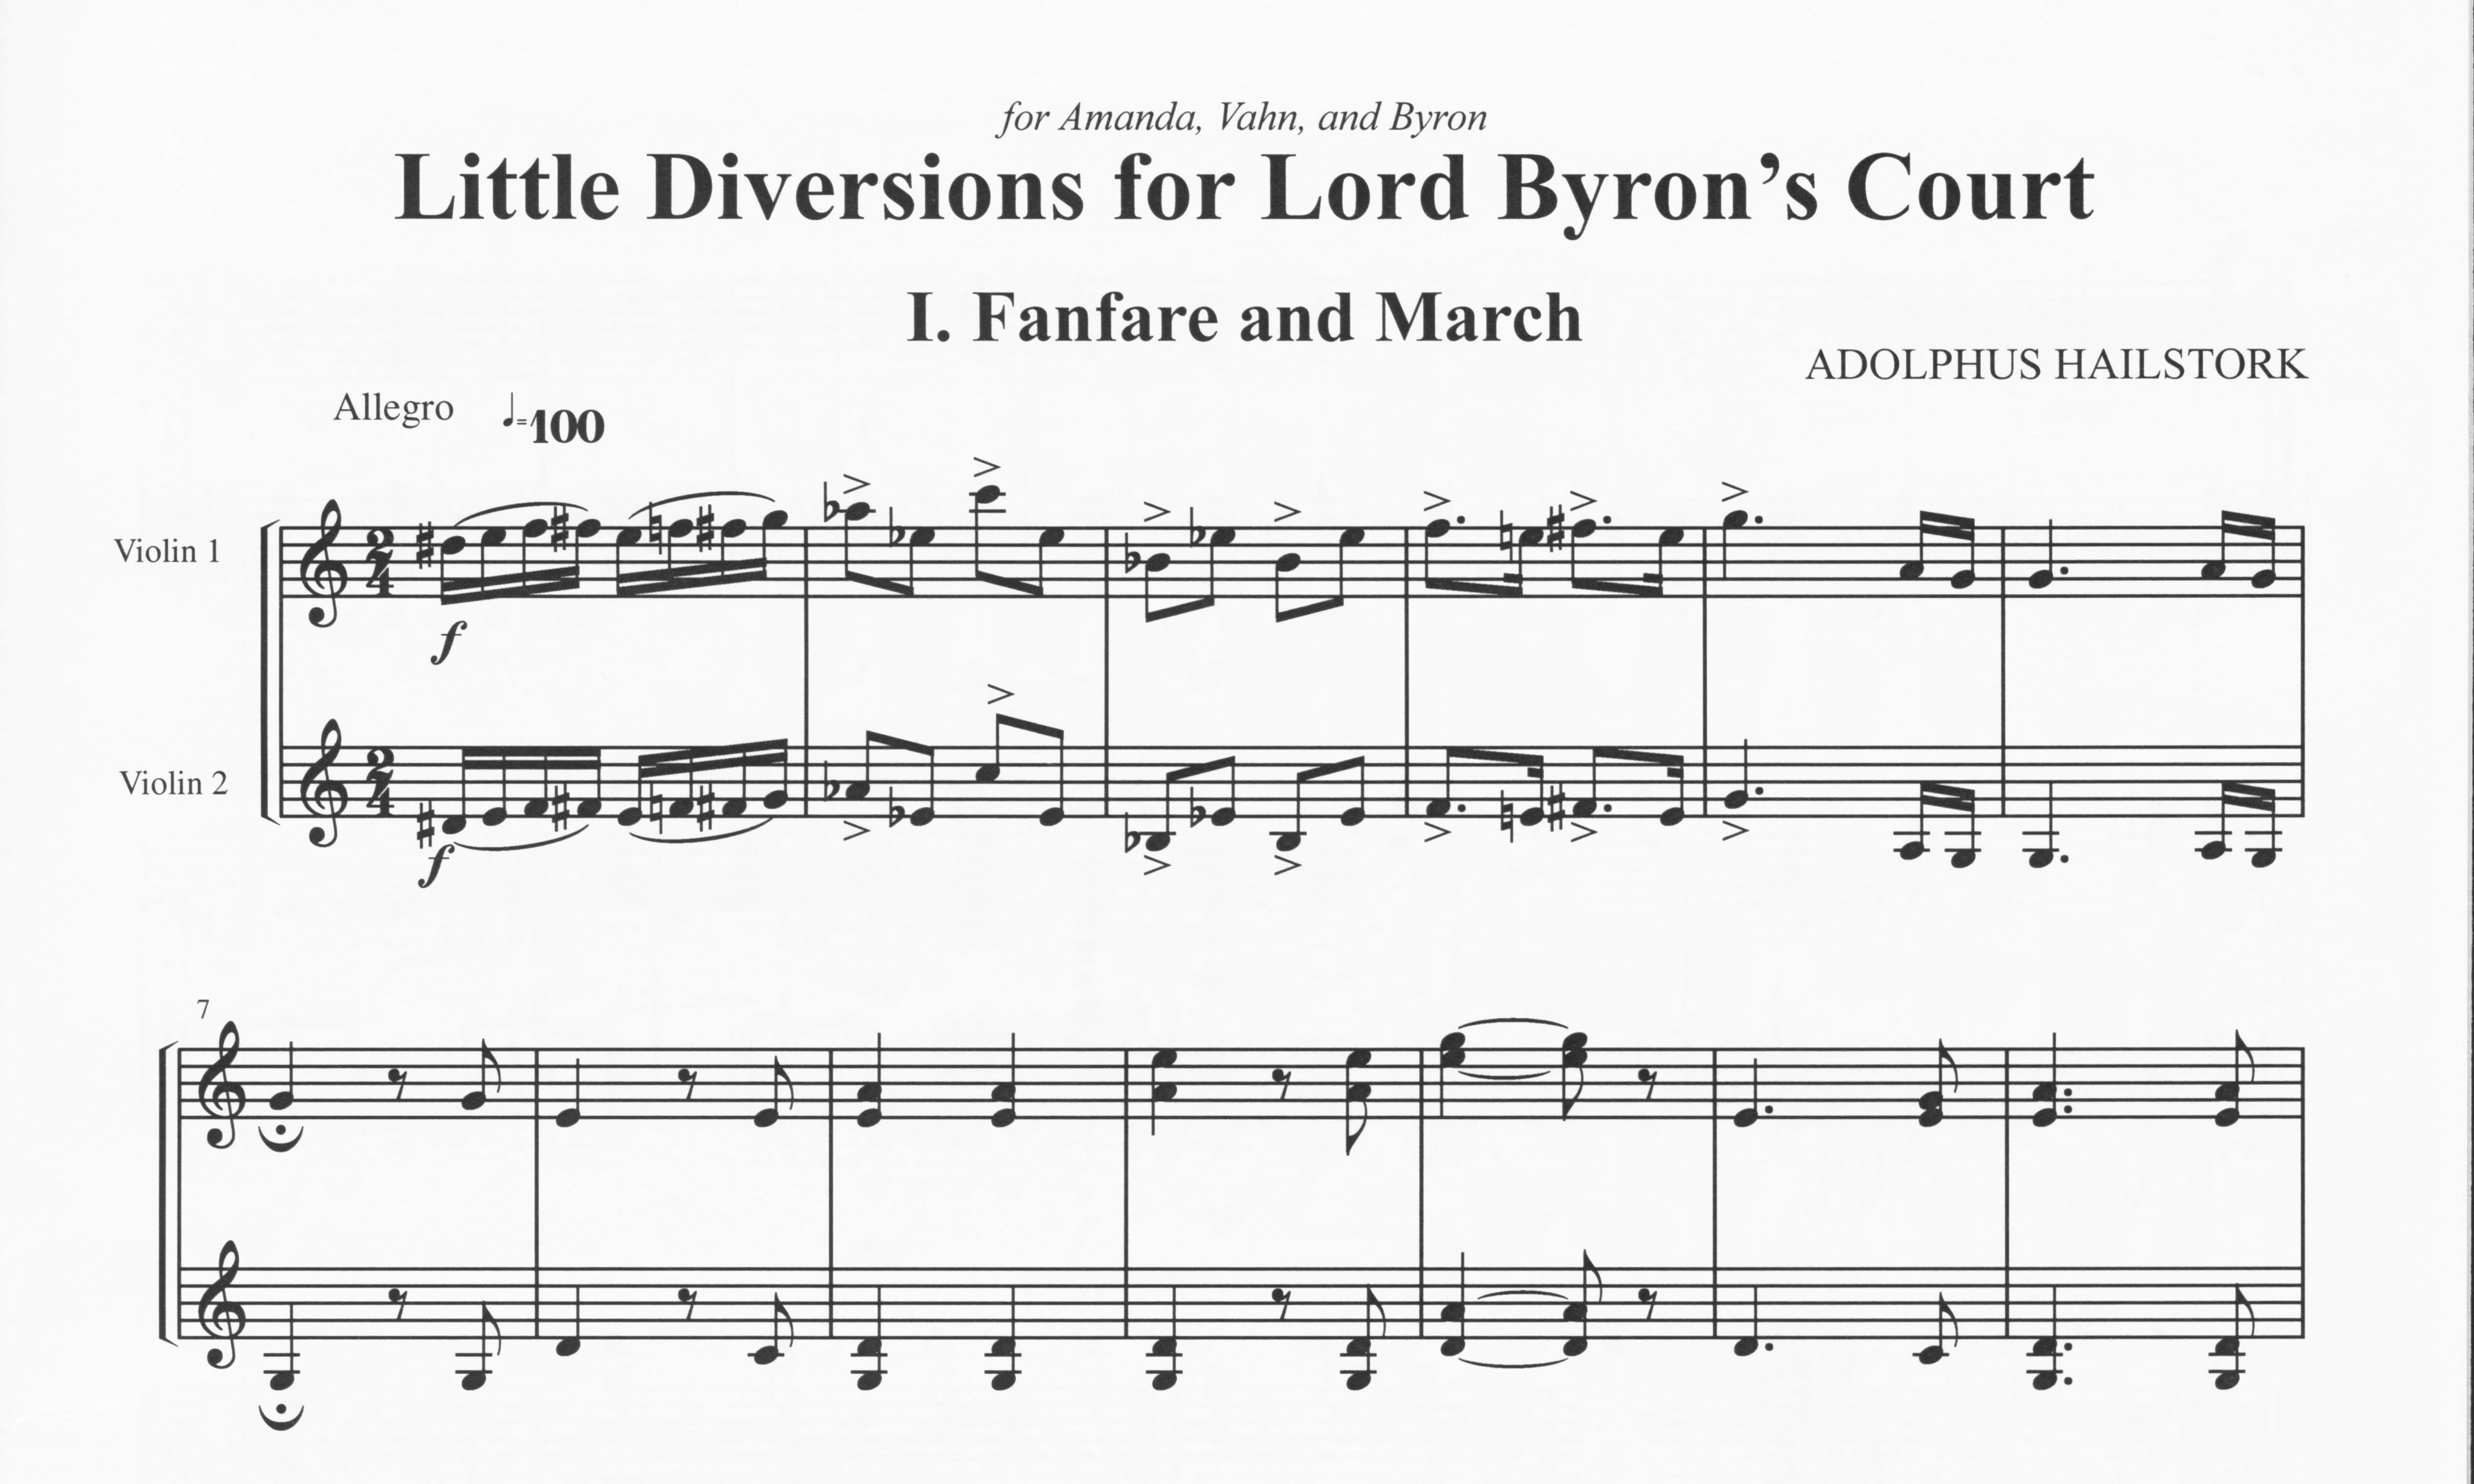 Little Diversions for Lord Byron's Court - Adolphus Hailstork